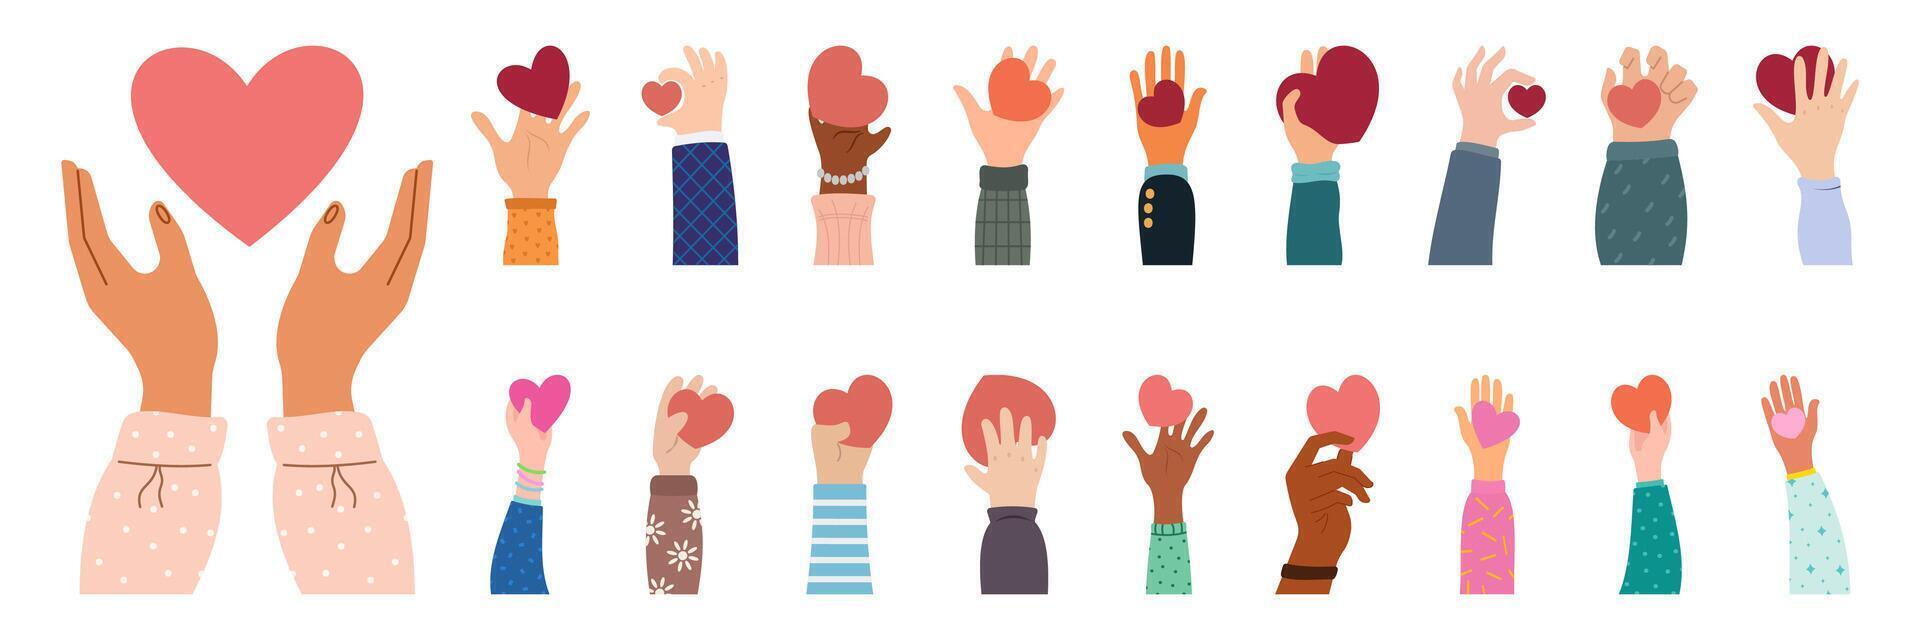 Heart holding by diverse hands set. Vector illustration concept for sharing love, helping others, charity supported by global community.